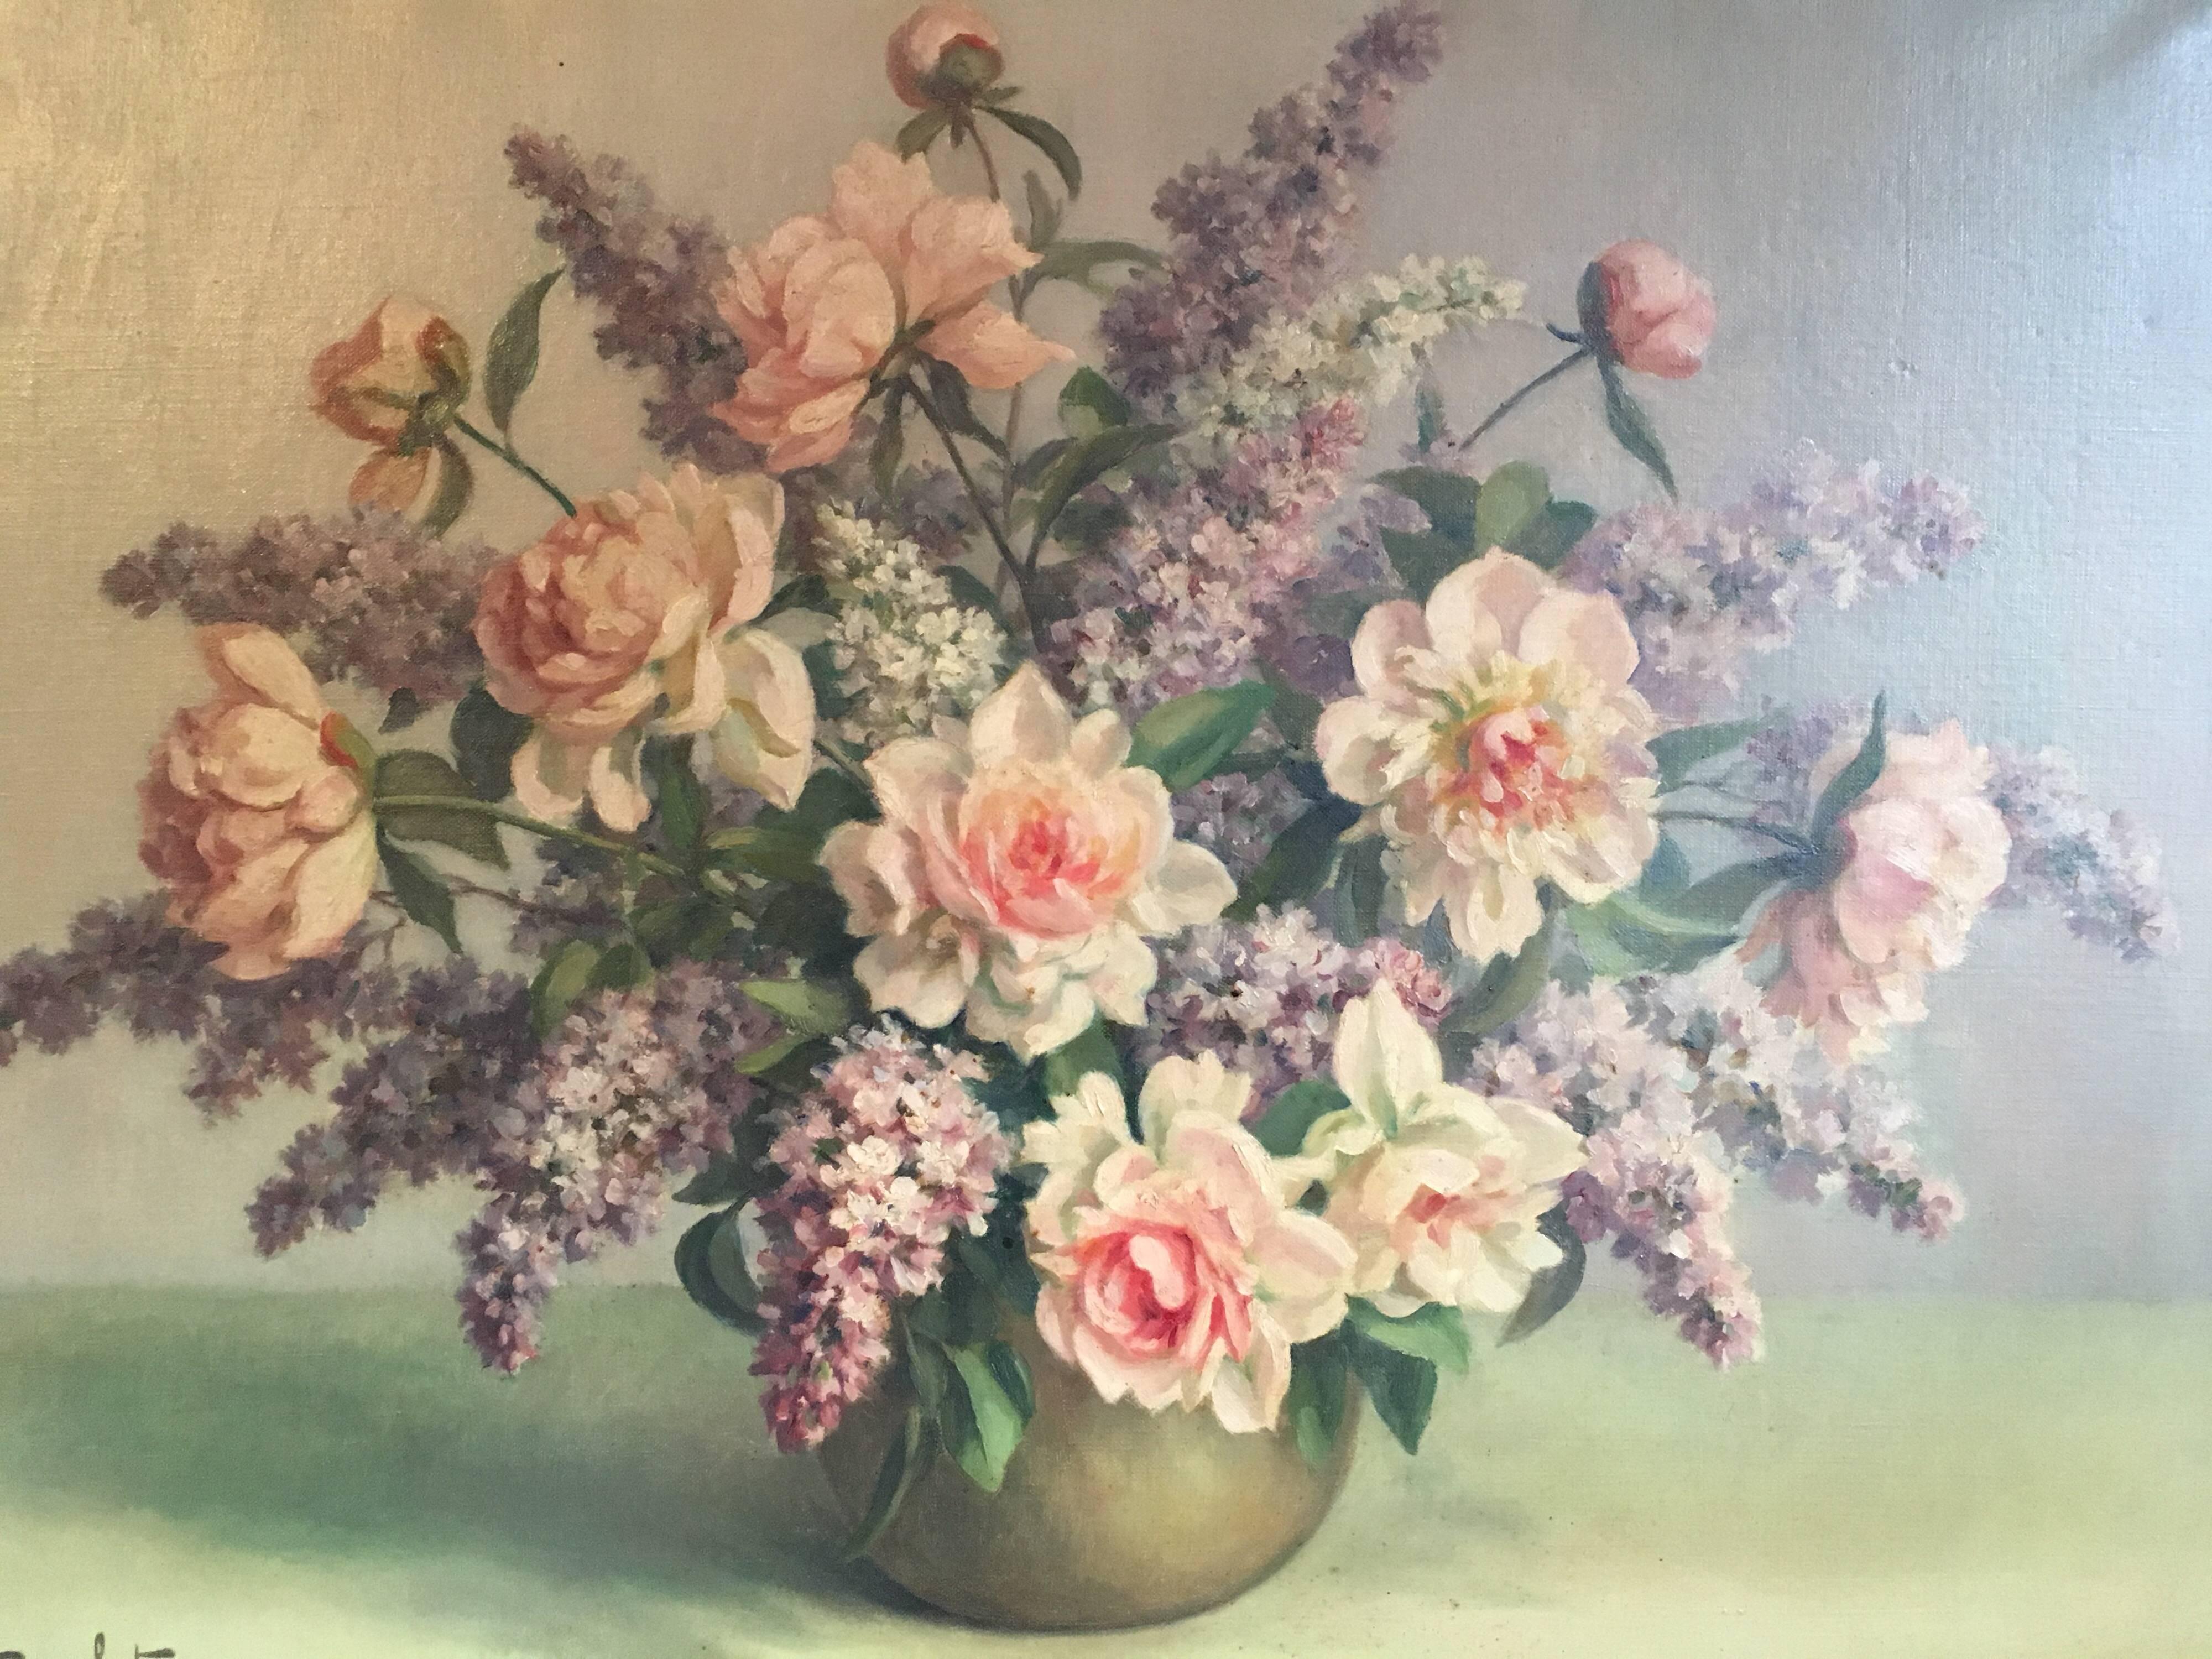 Floral Bouquet
By Andre Granchet, French artist, early 20th Century
Signed by the artist on the lower left hand corner
Oil painting on canvas, framed
Framed size: 31 x 39 inches

Delightful oil of a bouquet of flowers, peonies and foxgloves. The